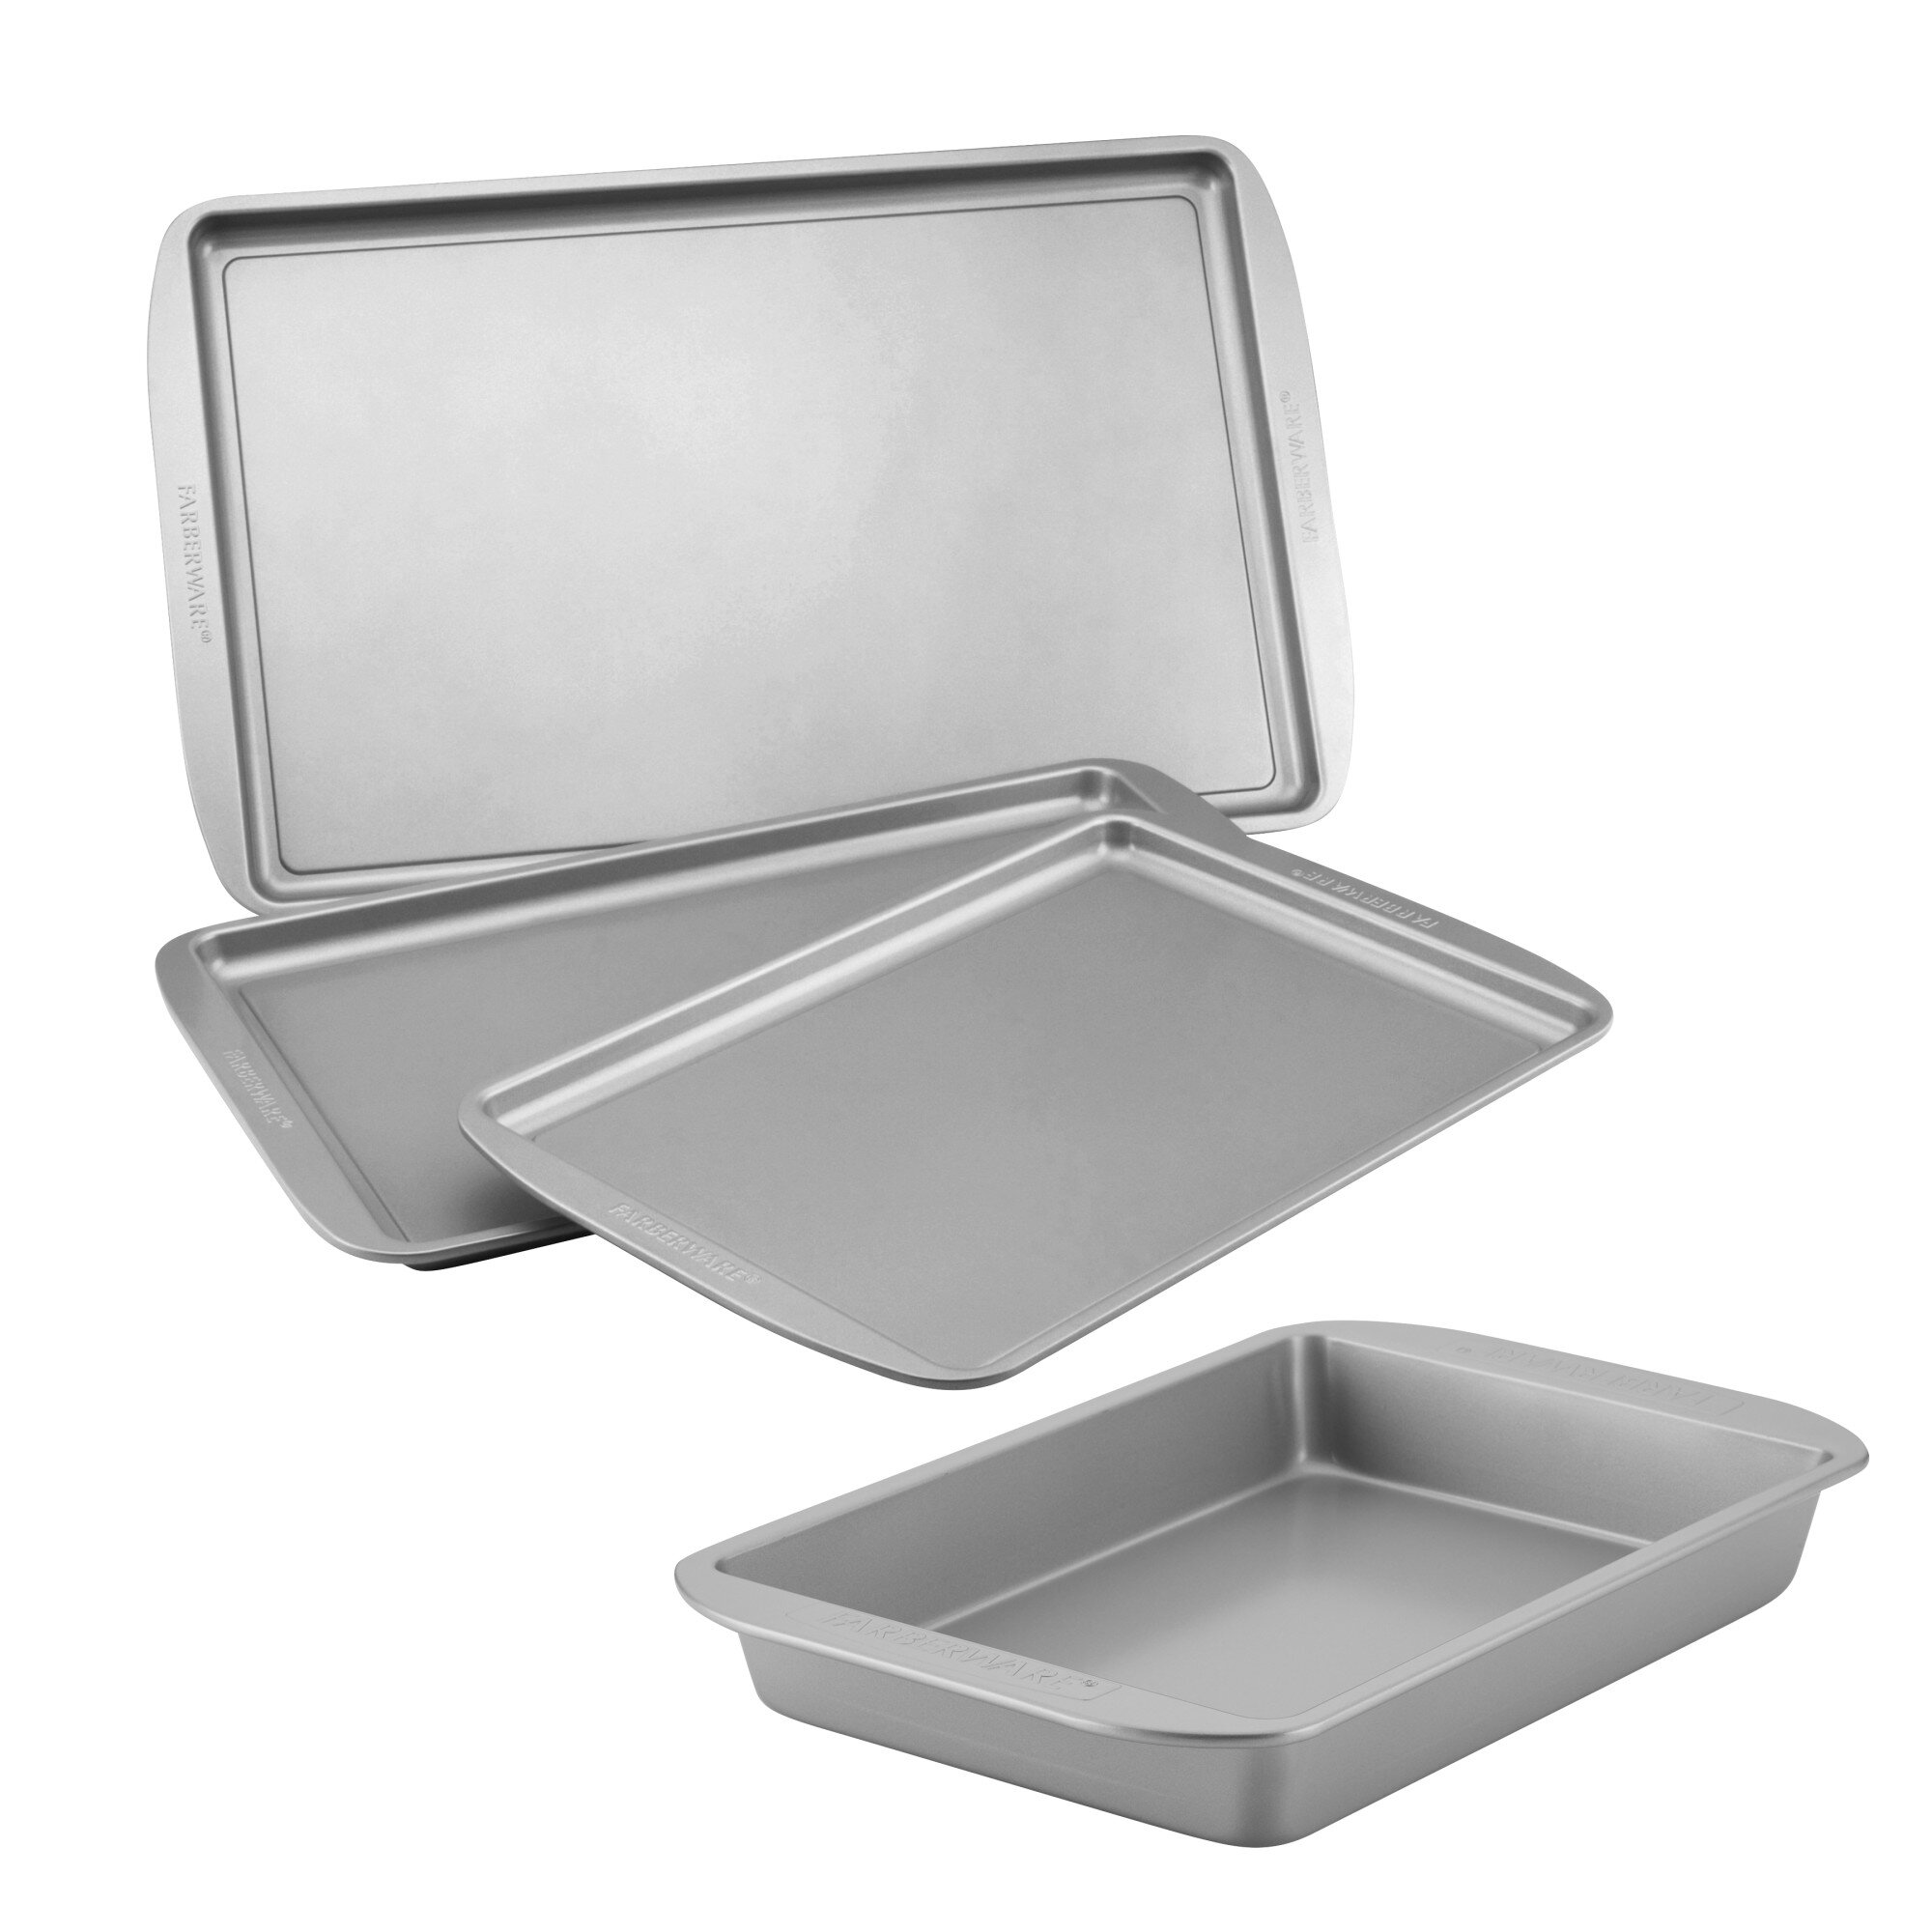 Used Calphalon Nonstick Bakeware, Cookie Sheet, 14-inch by 17-inch